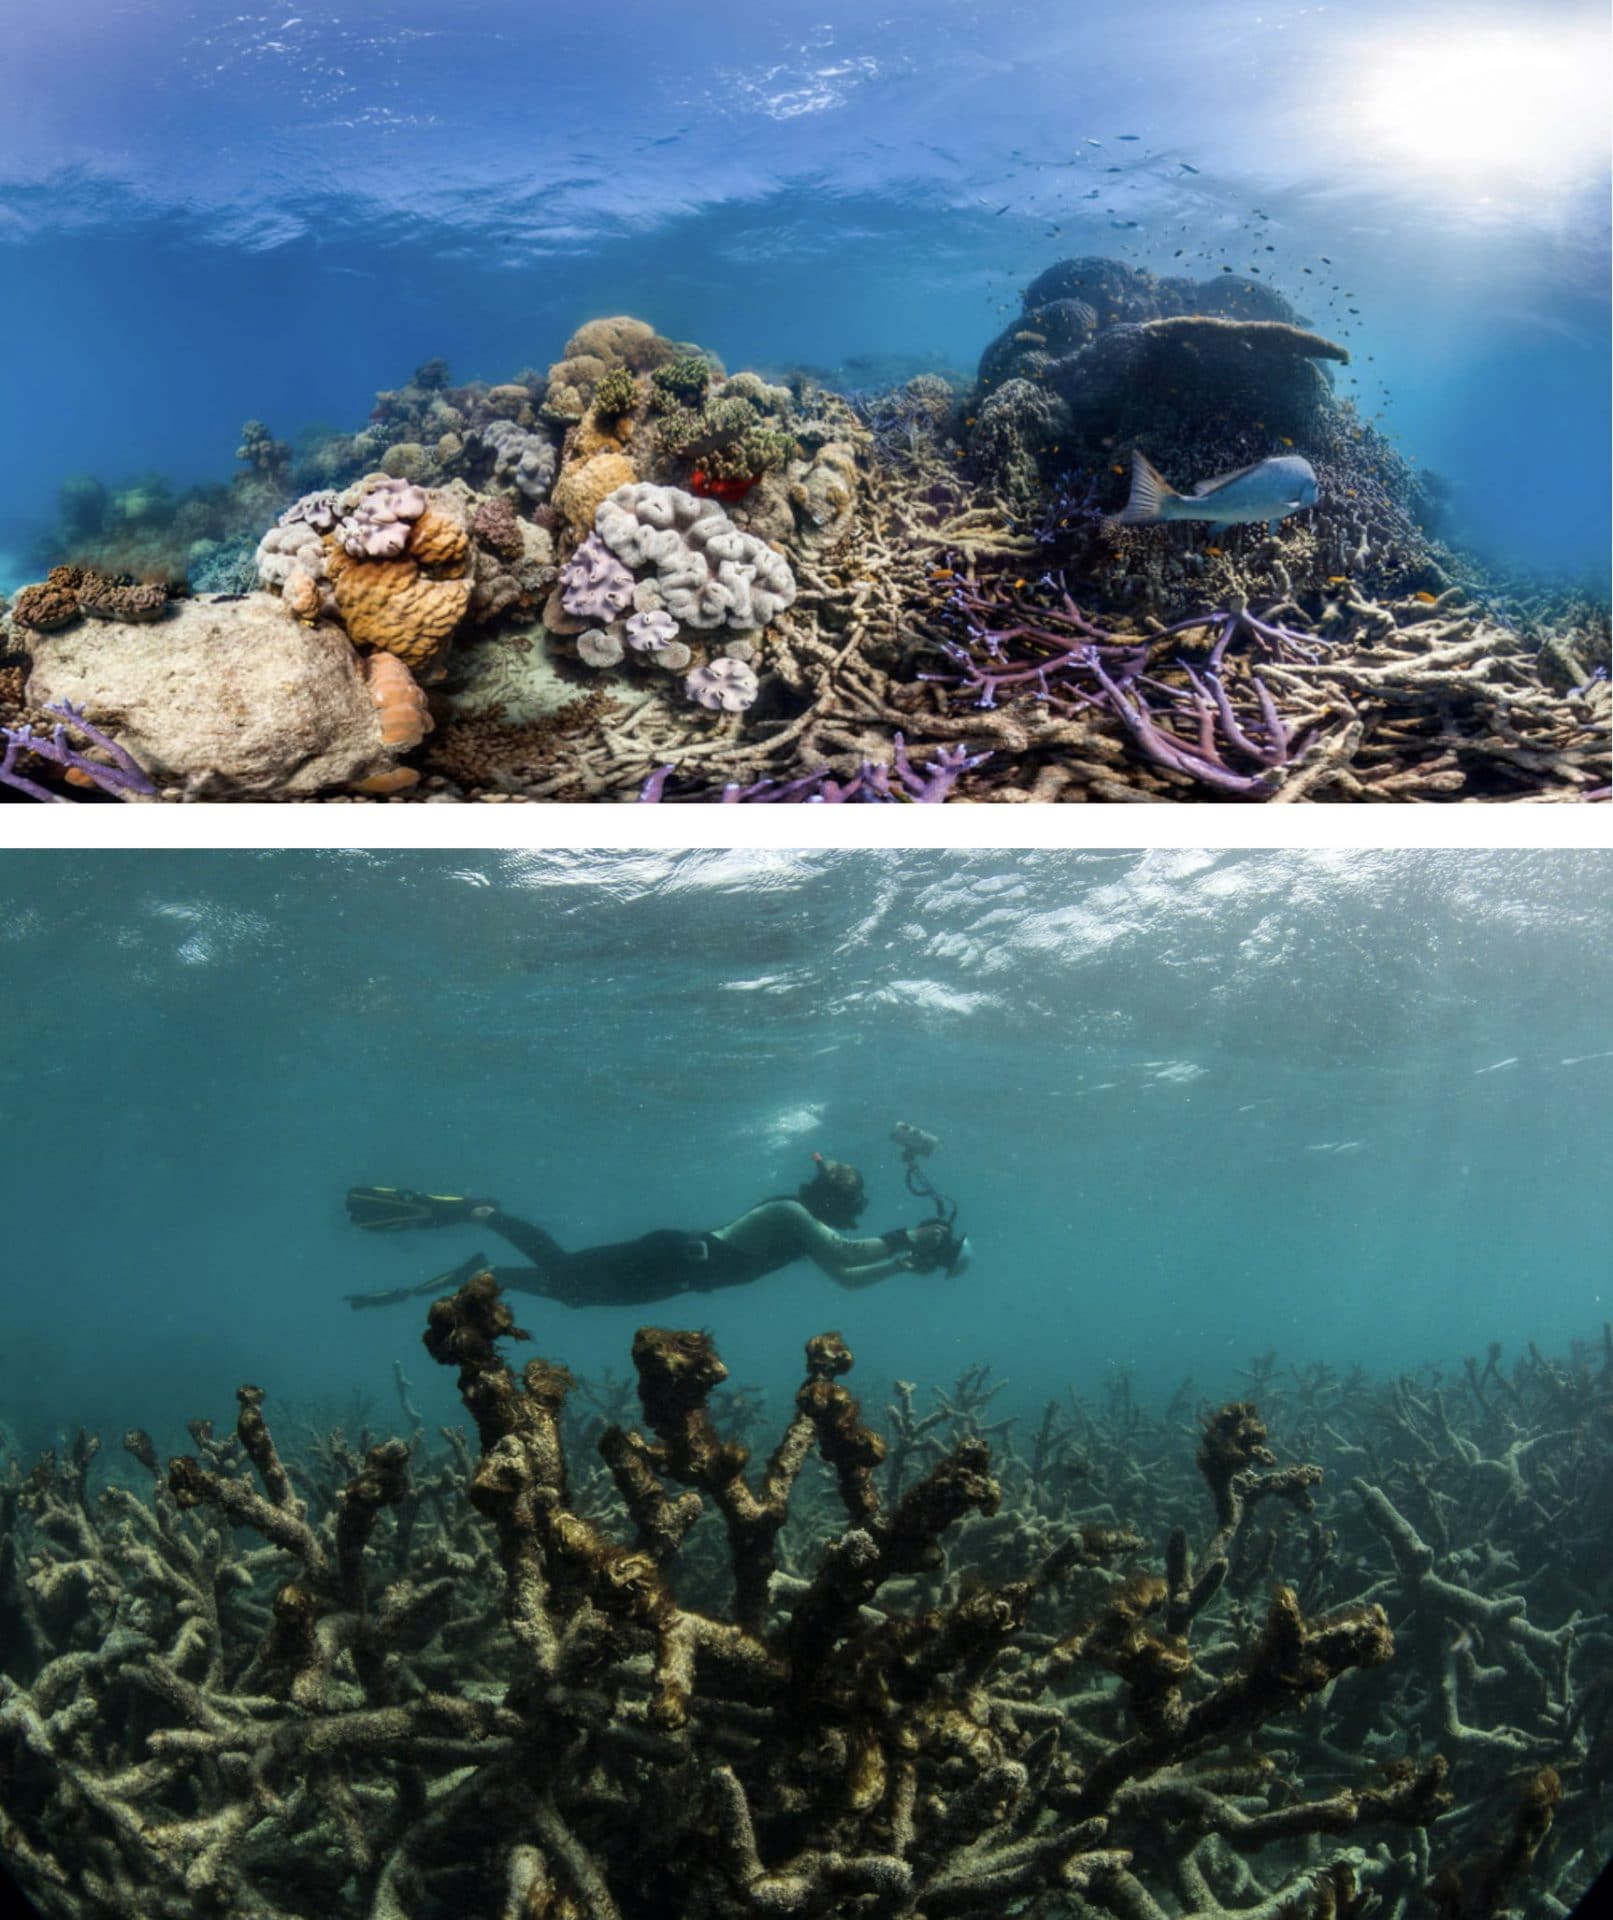 Literally cooked in hot water—what happened in the latest coral bleaching on the Great Barrier Reef - Bulletin of the Atomic Scientists